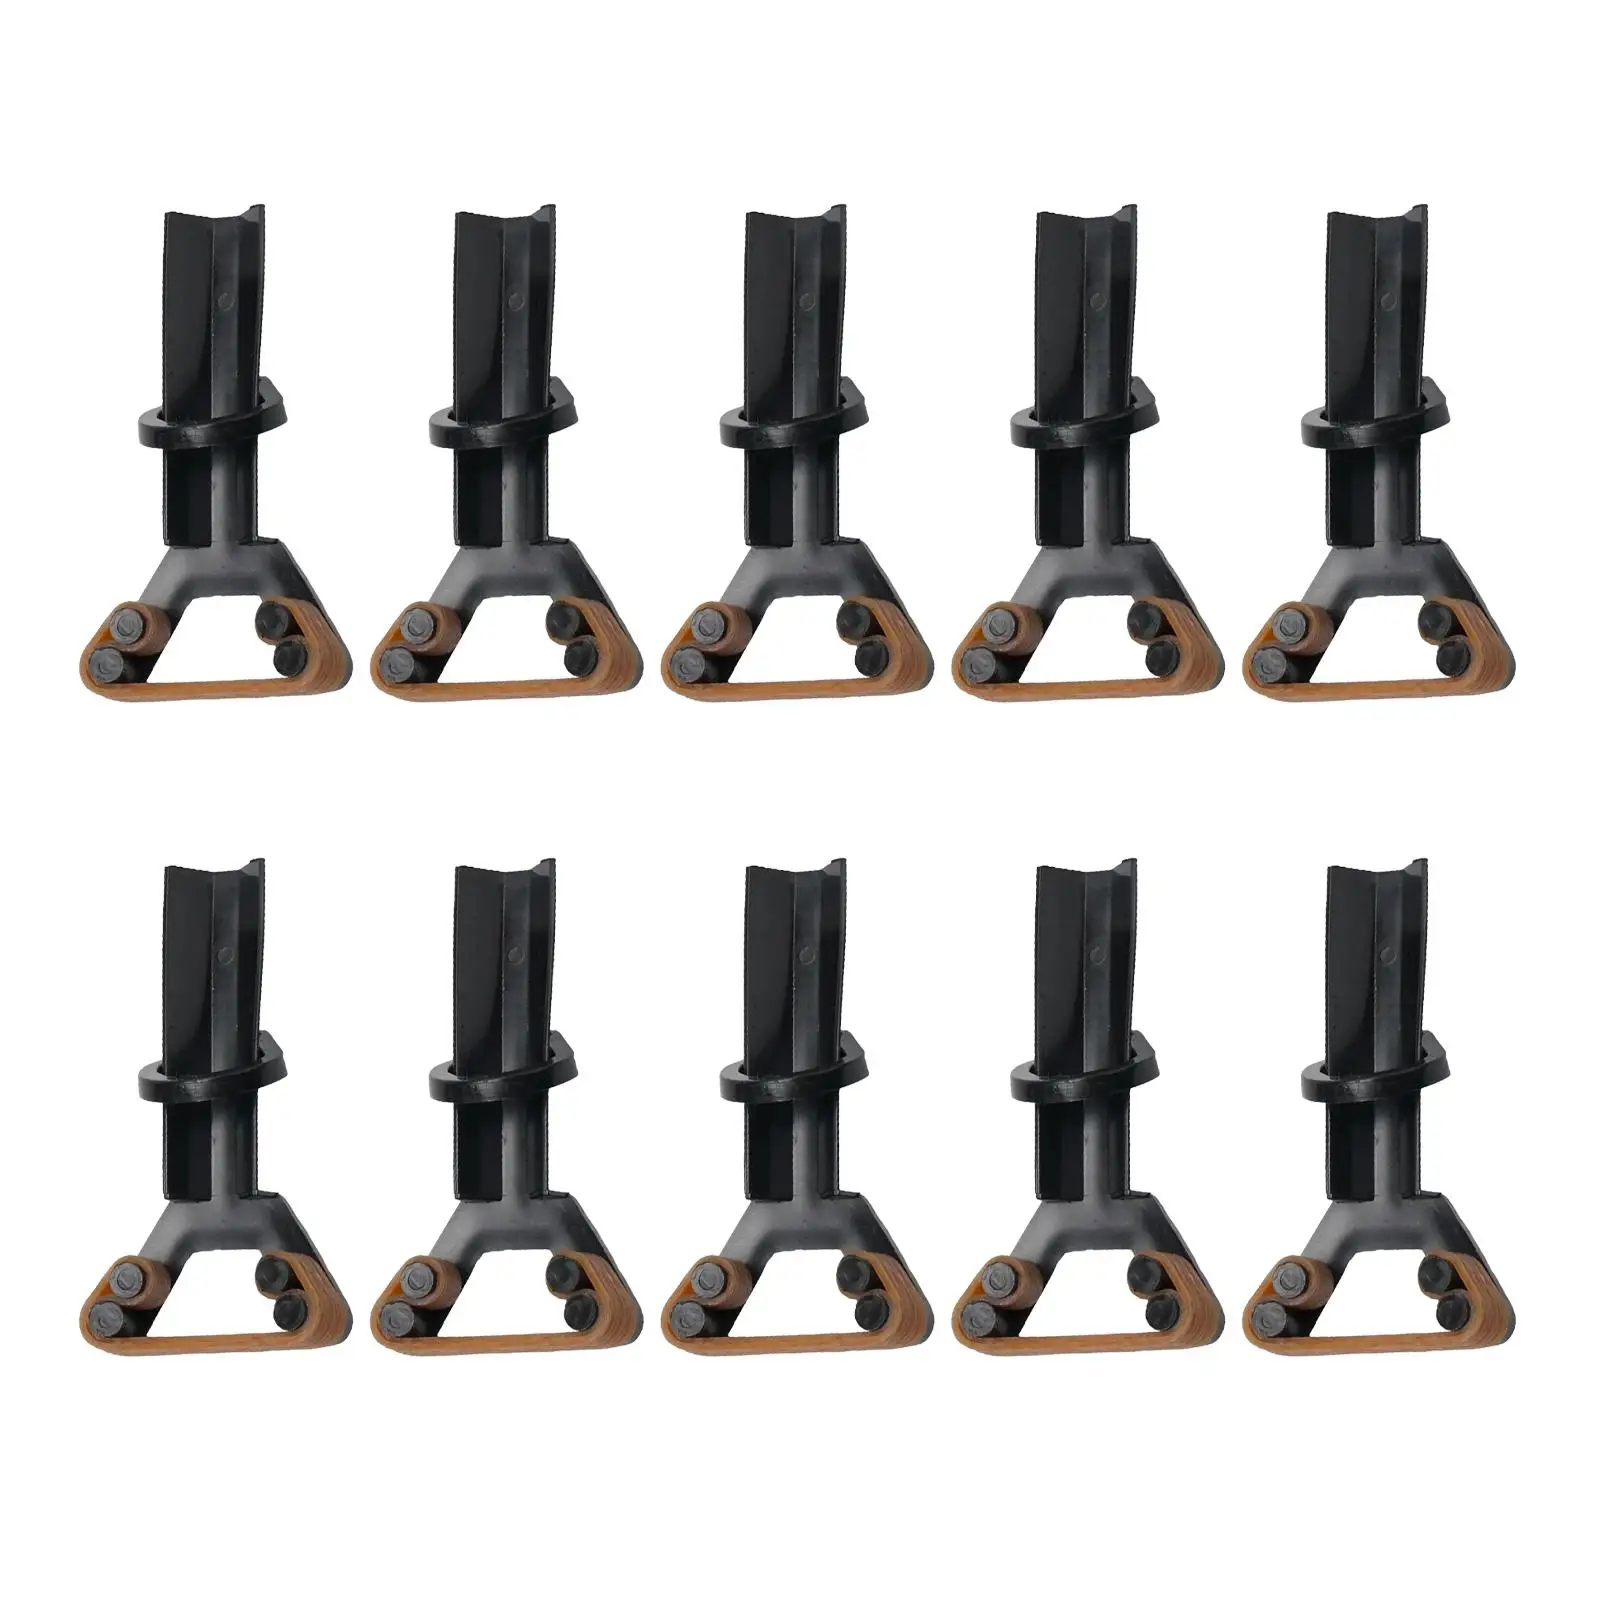 10x Pool Cue Tip Clamp Billiard Snooker Cue Tip Clamp for Club Party Player